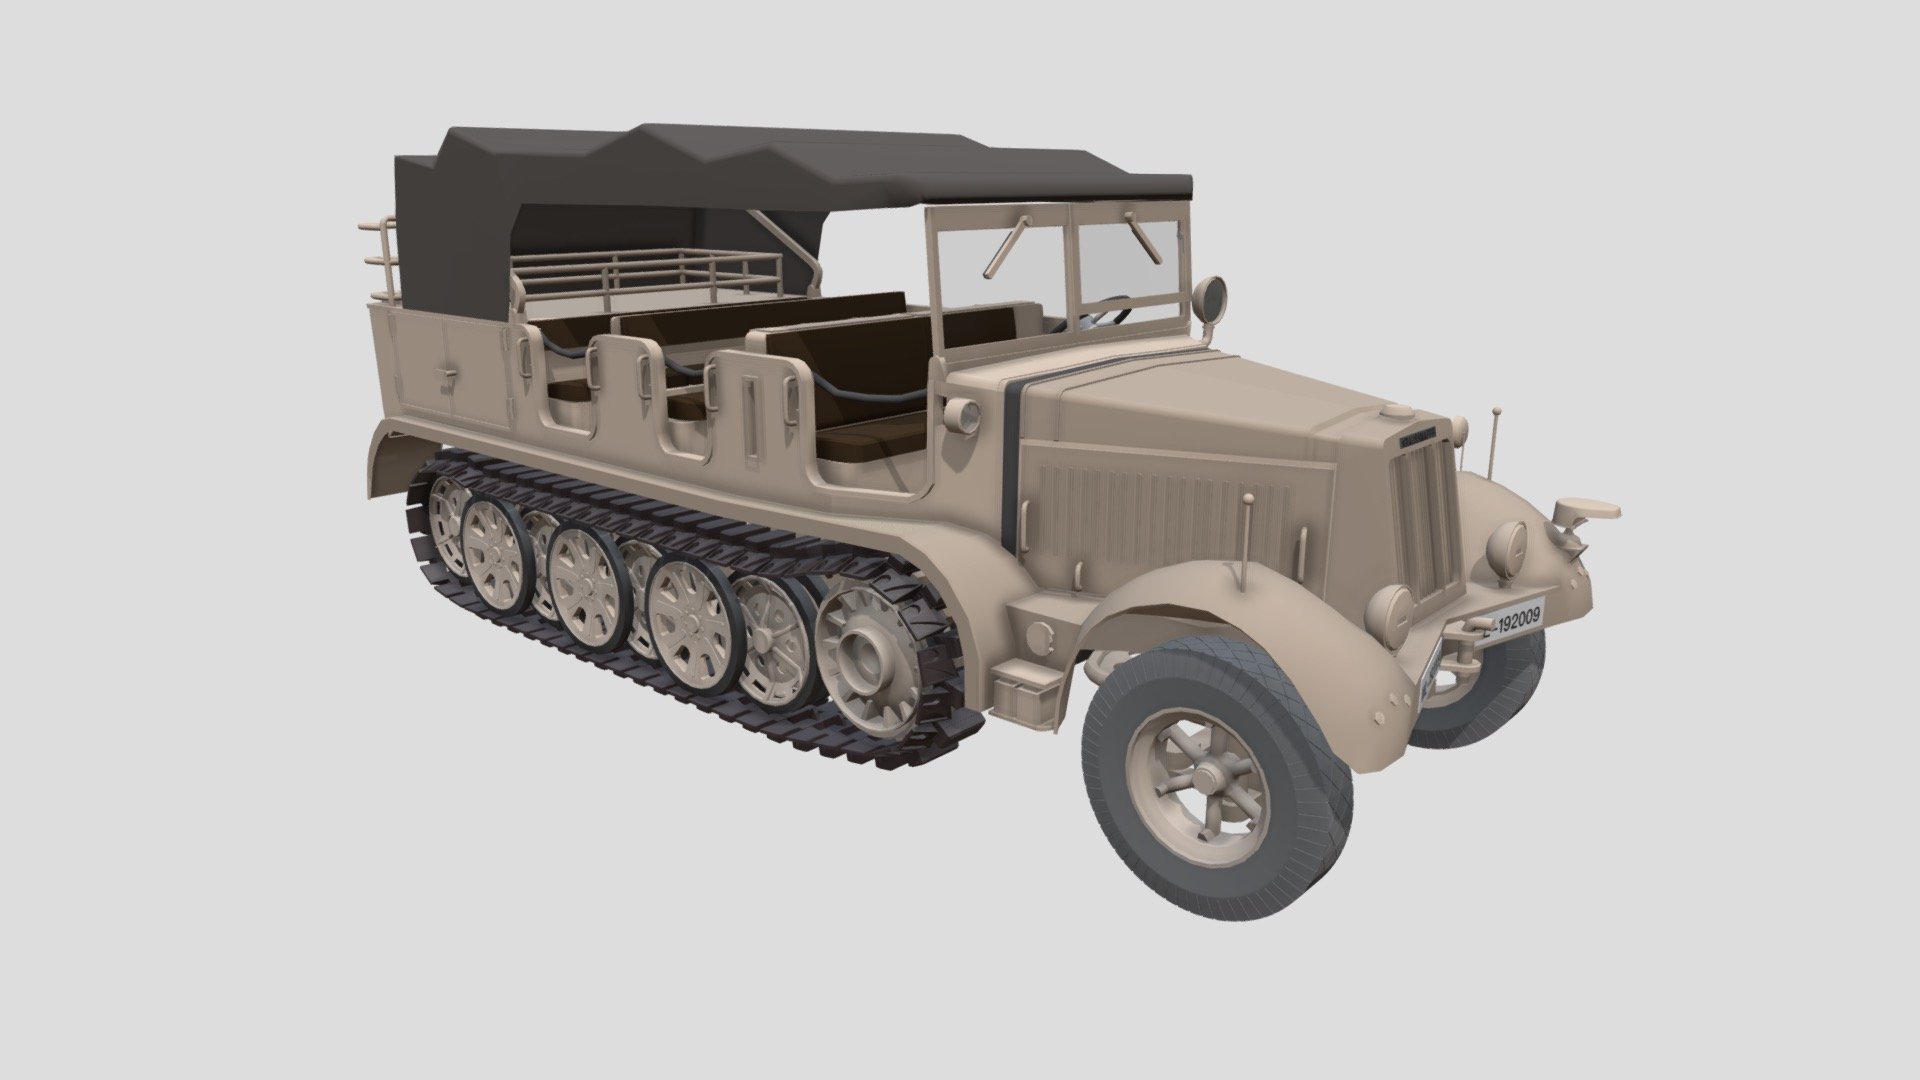 German 8 ton SEMI Track Sd.Kfz 7.

The Sd.Kfz. 7 was a half-track military vehicle used by the German Army, Luftwaffe and Waffen-SS during the Second World War.

二戰德國半履帶 8 噸人員輸送/牽引車。 - SD.KFZ. 7 APC - 3D model by Basic Hsu (@Hsu.Pei.Ge) 3d model